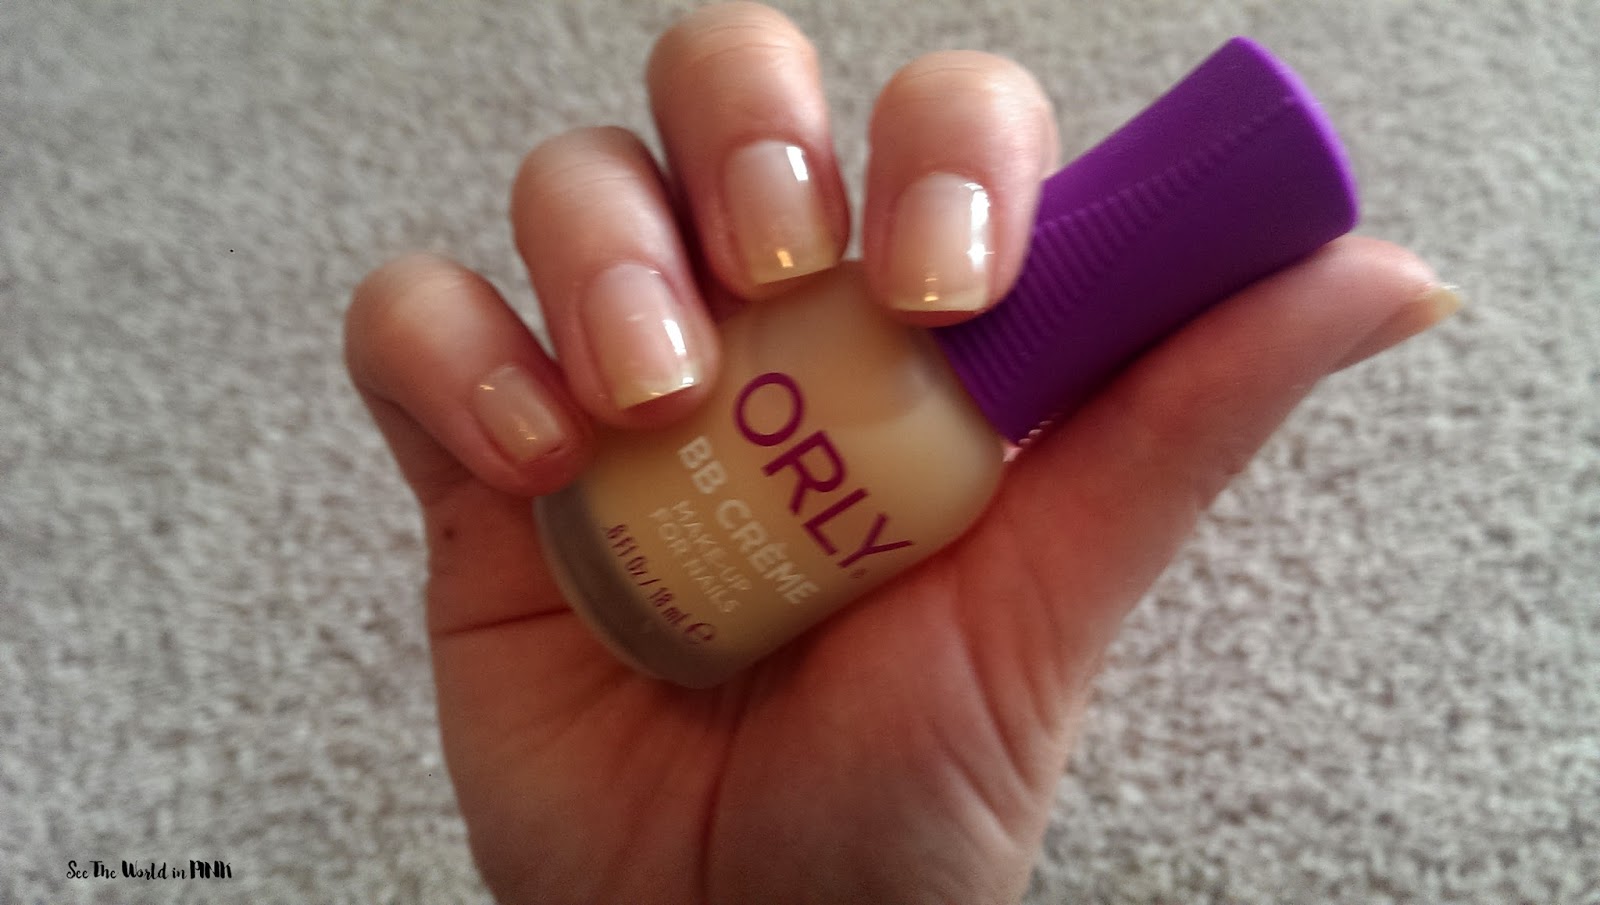 Manicure Monday - ORLY Nail BB Creme | See the World in PINK